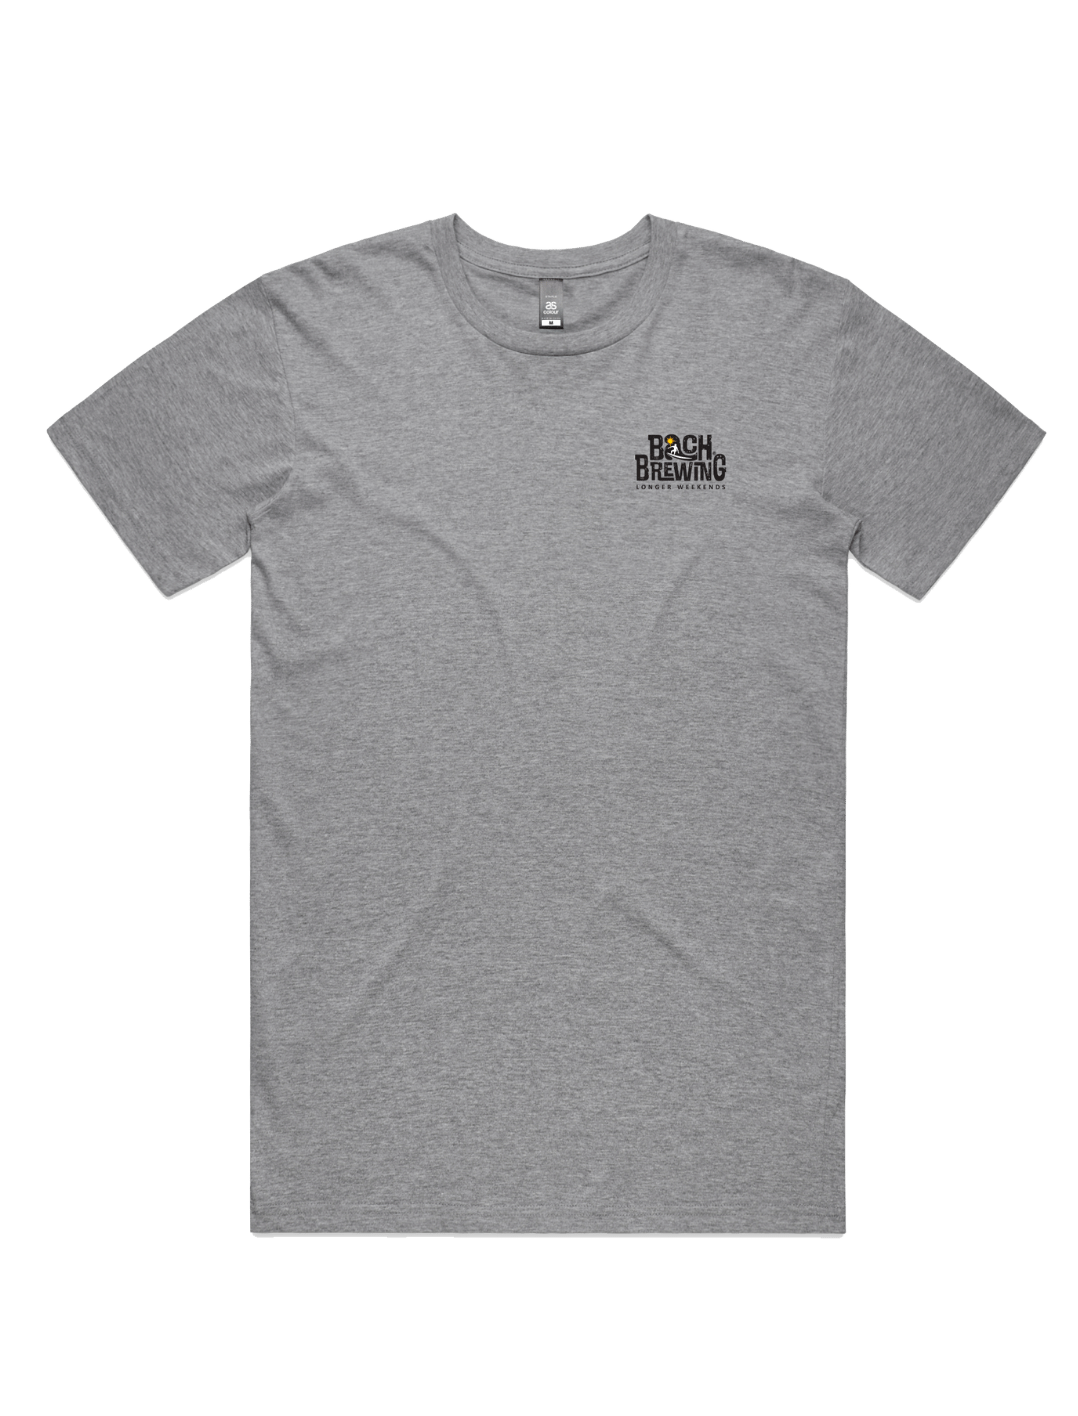 Bach Brewing Mens T-shirt - Wit Dream (back graphic)